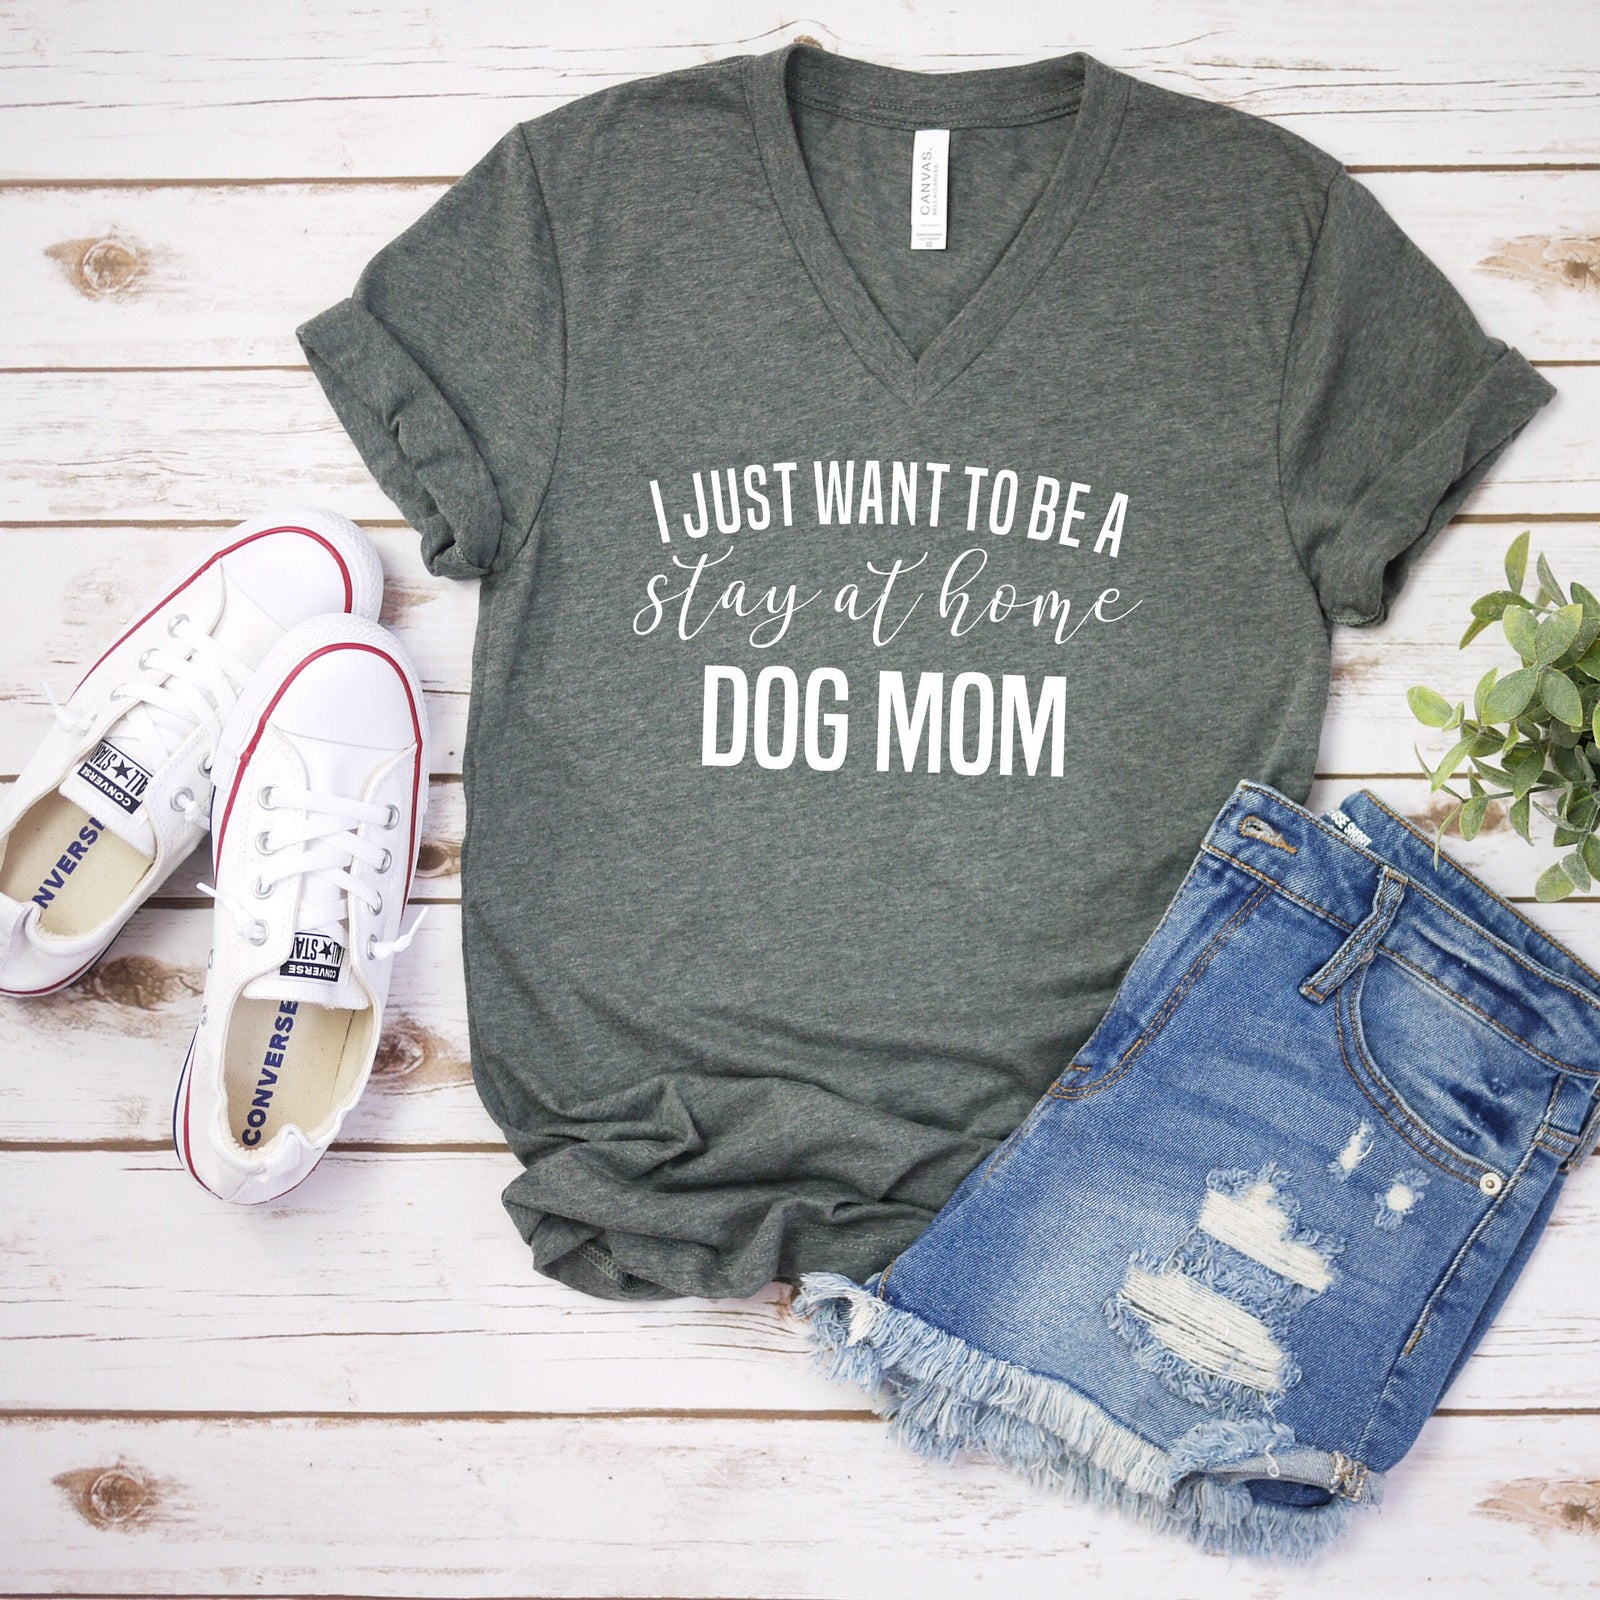 I Just Want to Be a Stay at Home Dog Mom T Shirt - Dog Lover - Pet Rescue T Shirt - Funny Dog Mom Shirt